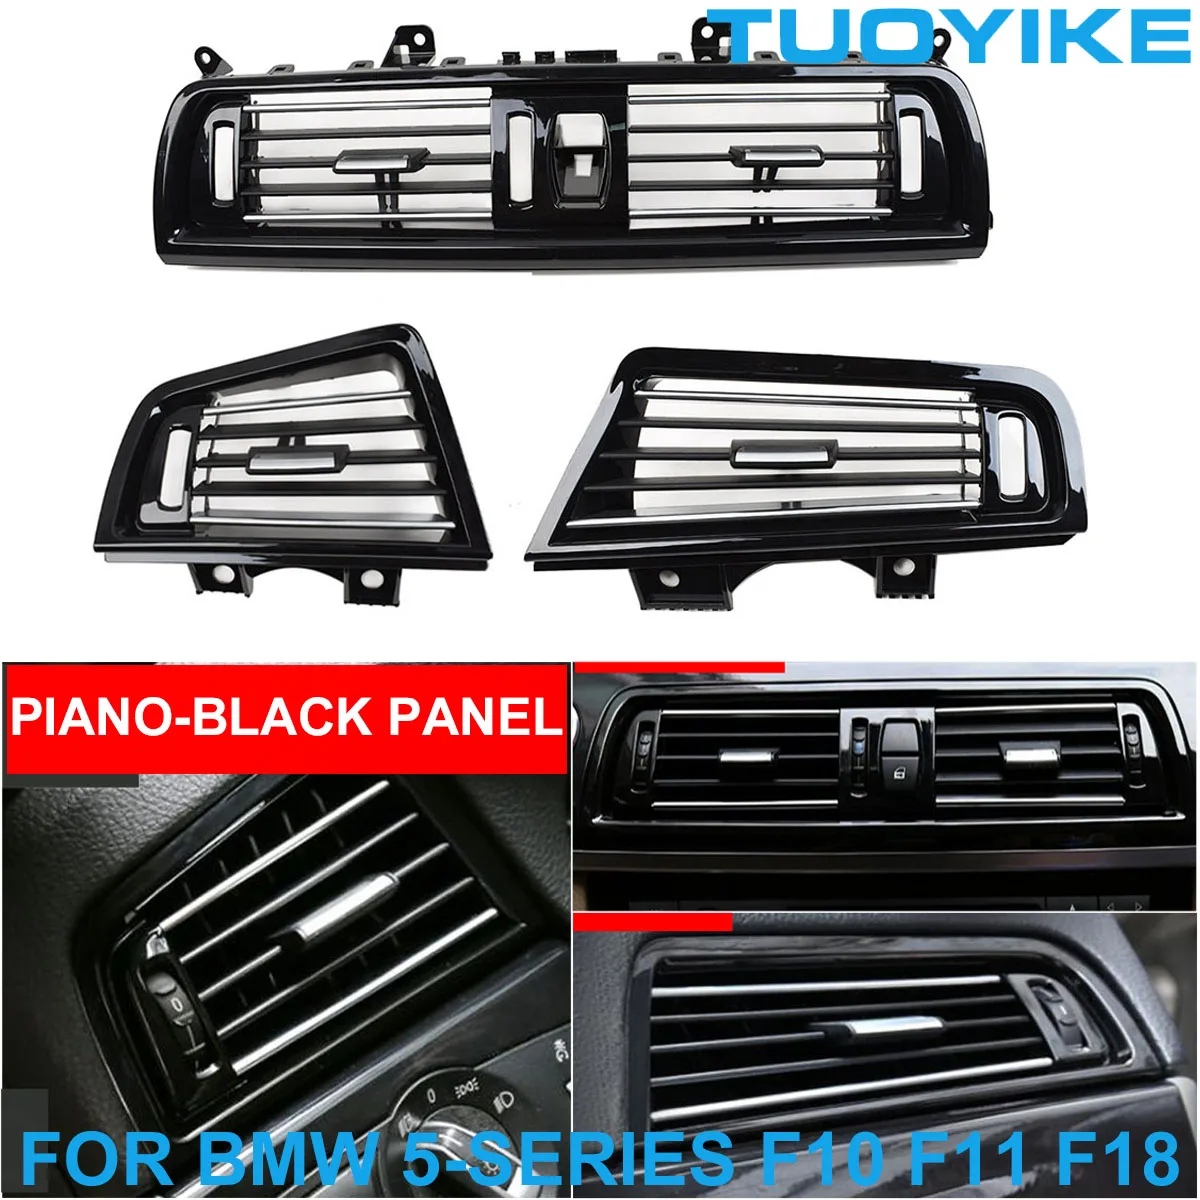 LHD RHD Front Central AC Air Vent Grille Panel Outlet Piano Black Chrome For BMW 5 Series F10 F11 F18 520i 523i 525i 528i 535i